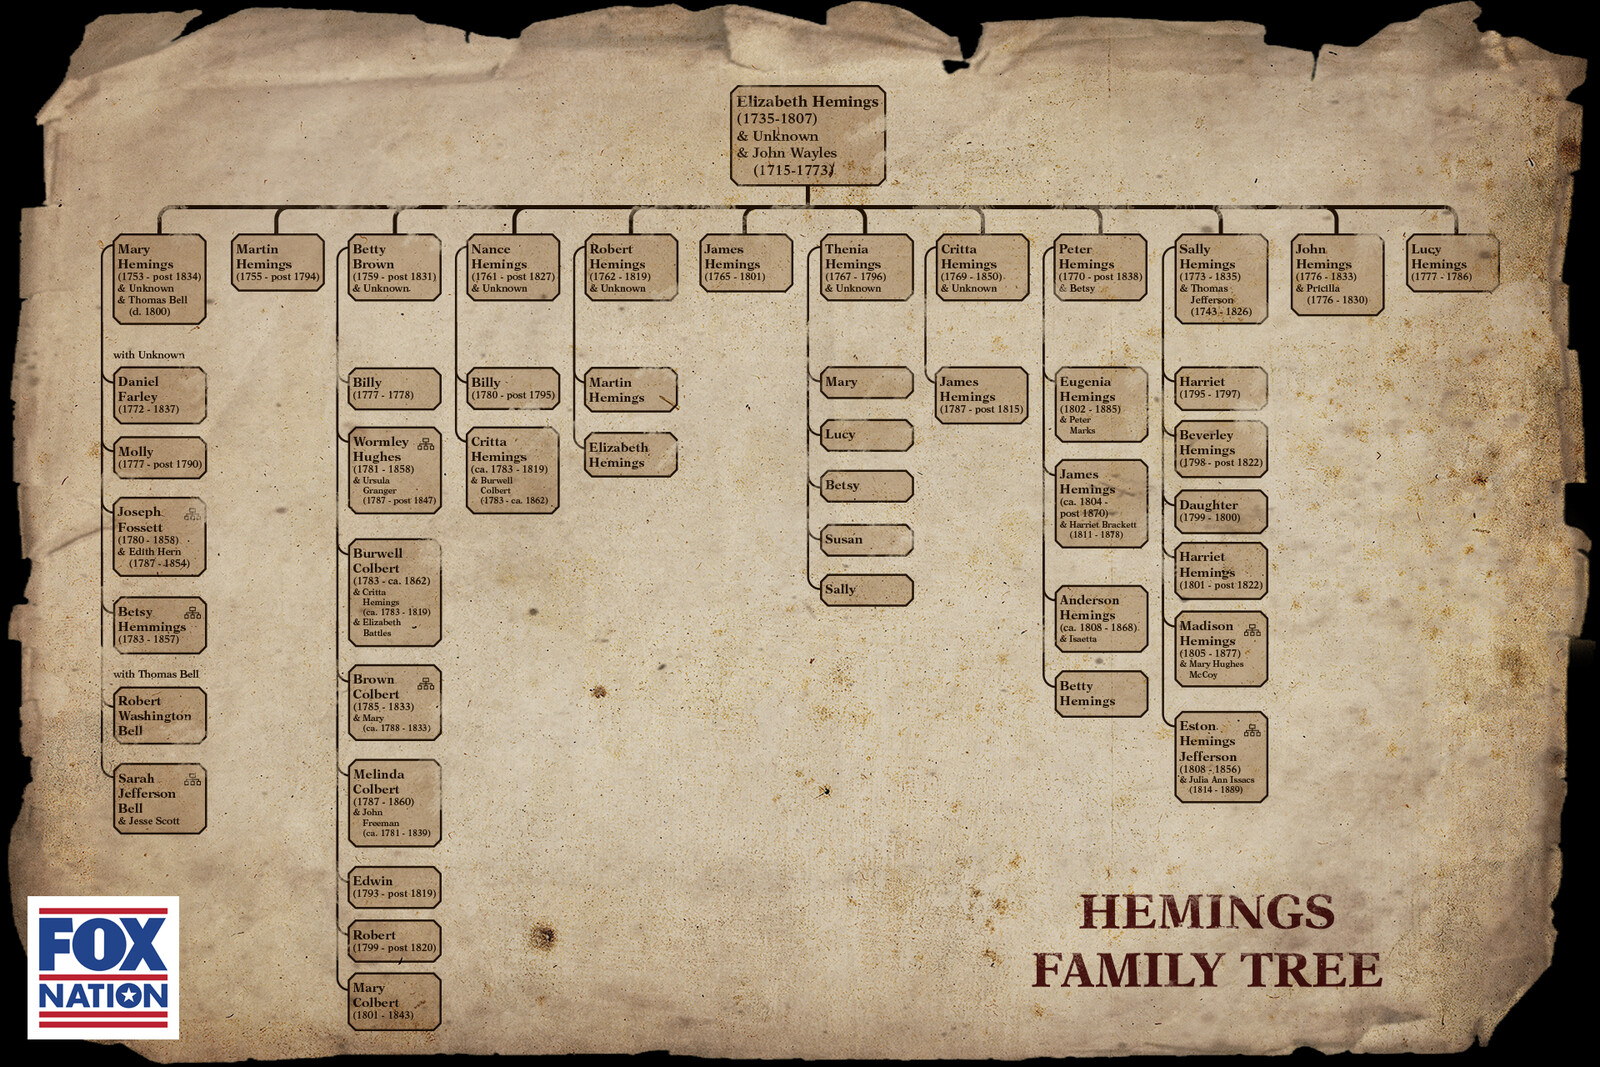 A family tree I created to go along with the look for the show What Made America Great. 
©FOX NATION